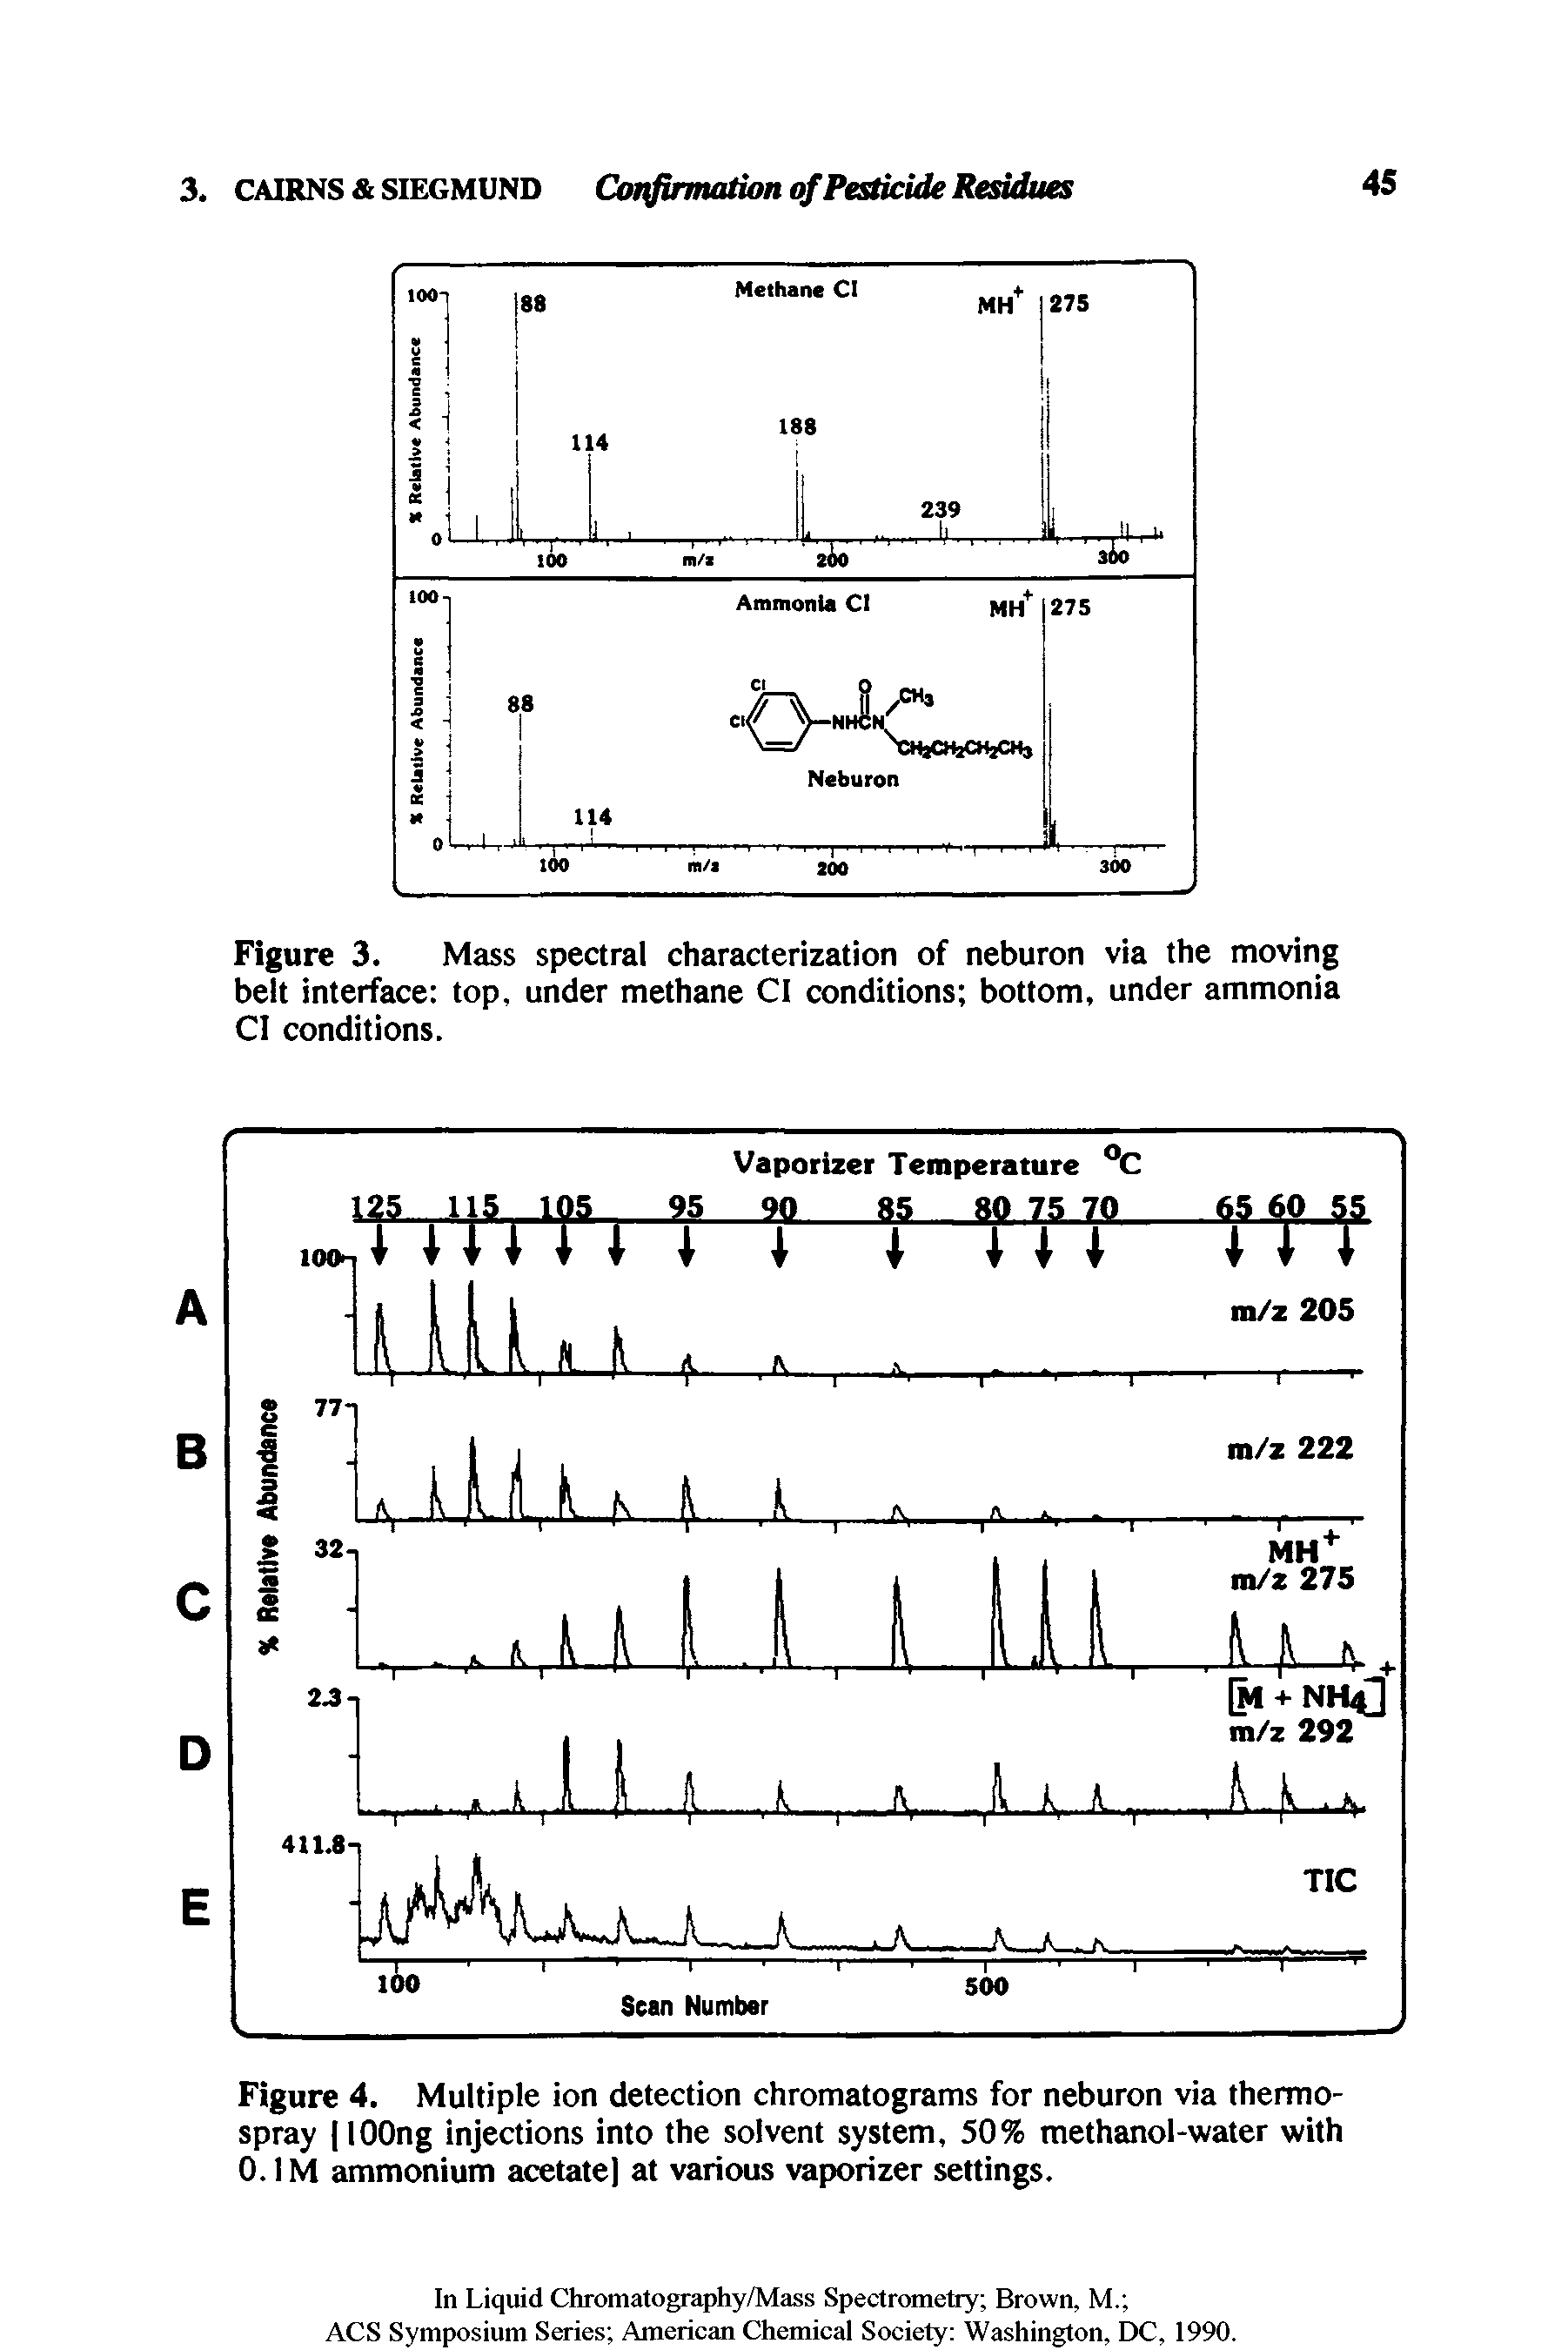 Figure 3. Mass spectral characterization of neburon via the moving belt interface top, under methane Cl conditions bottom, under ammonia Cl conditions.